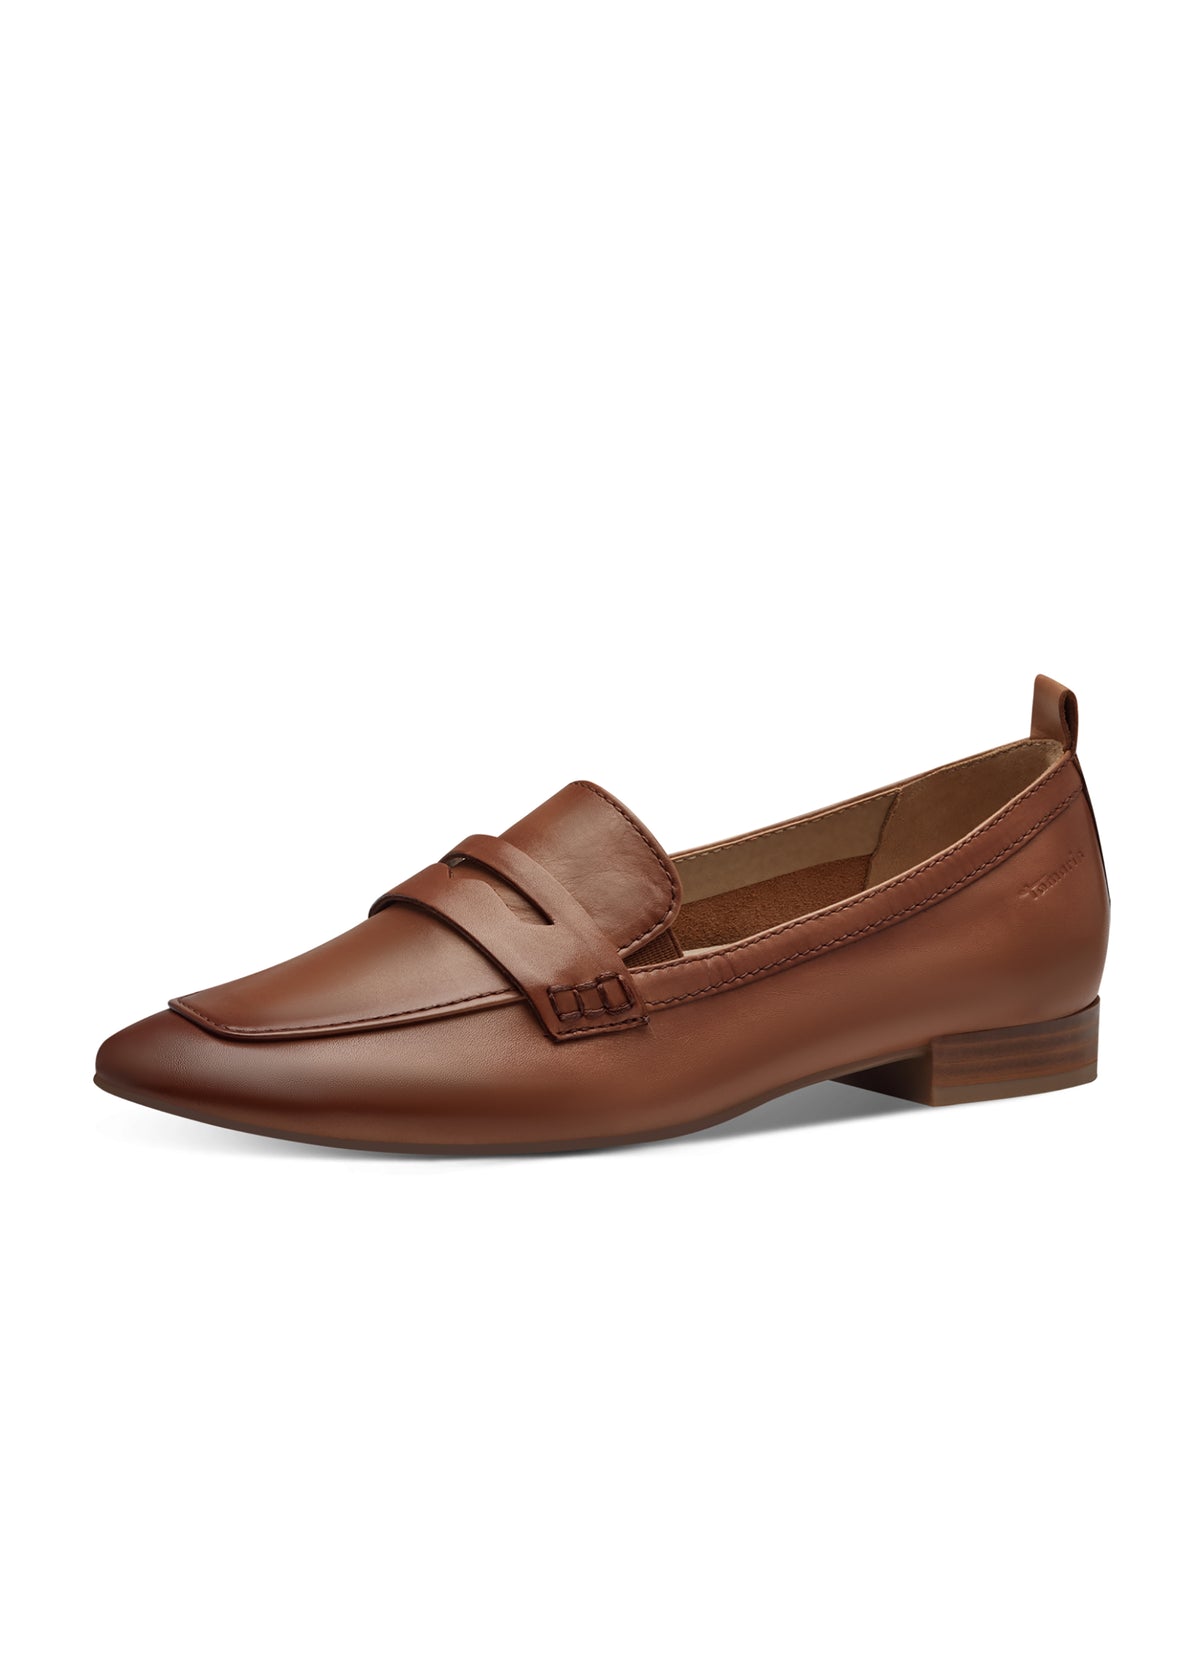 Loafers - nut brown leather